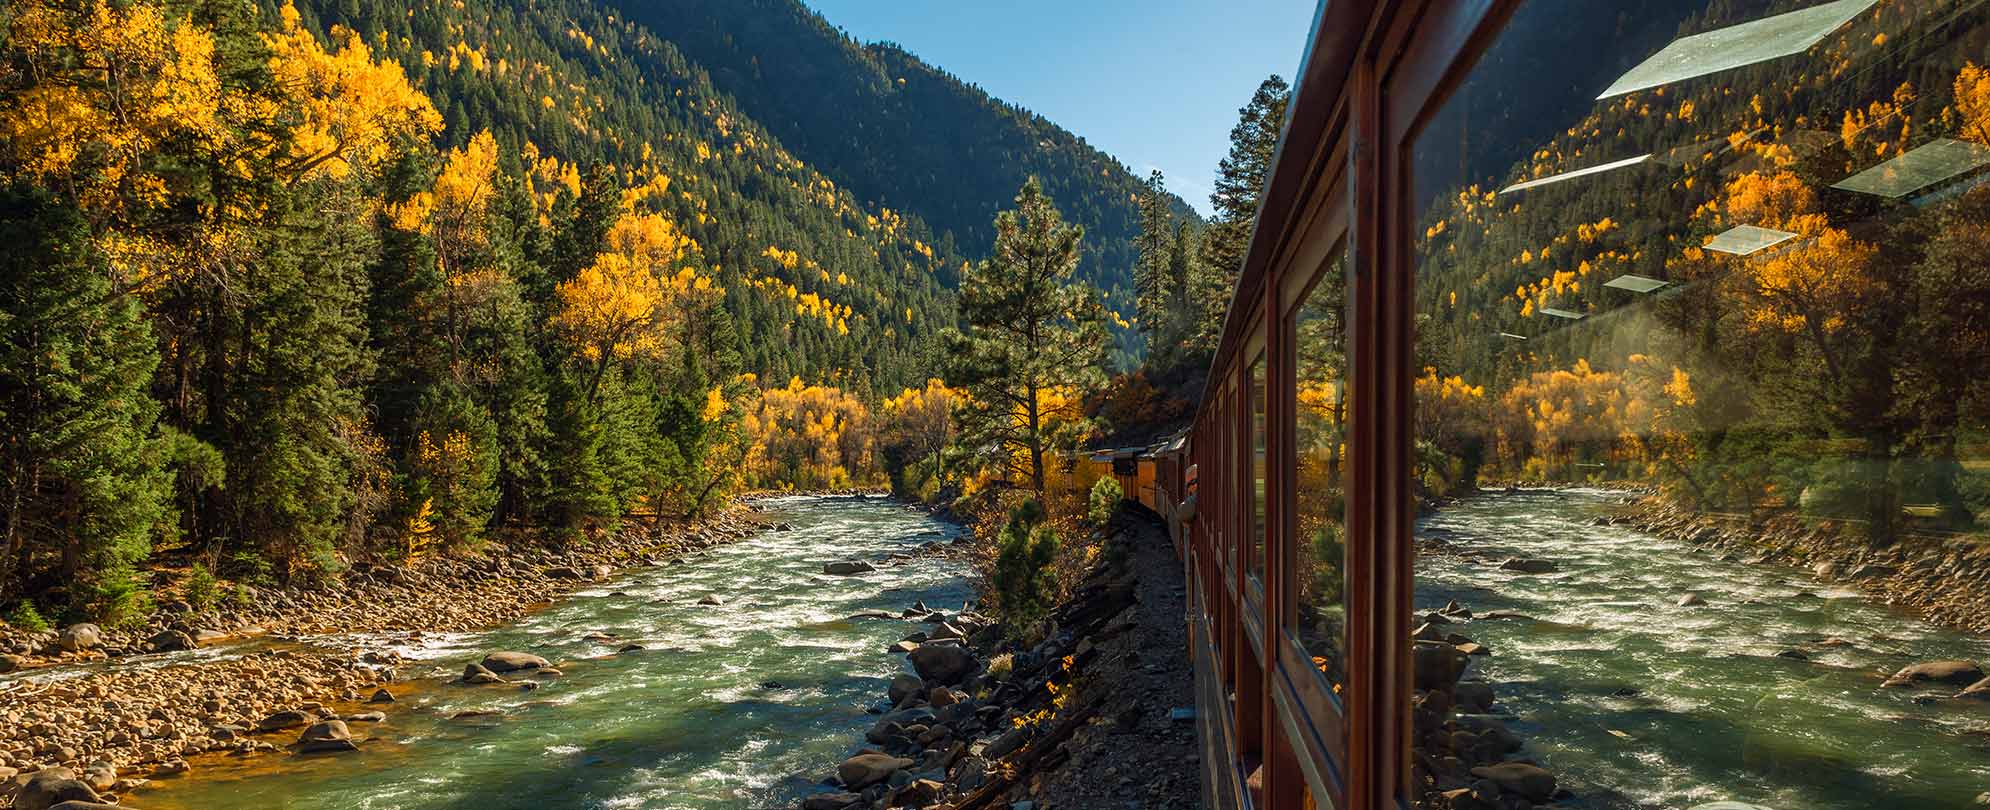 A train traveling through the mountainside with a flowing river beside it.